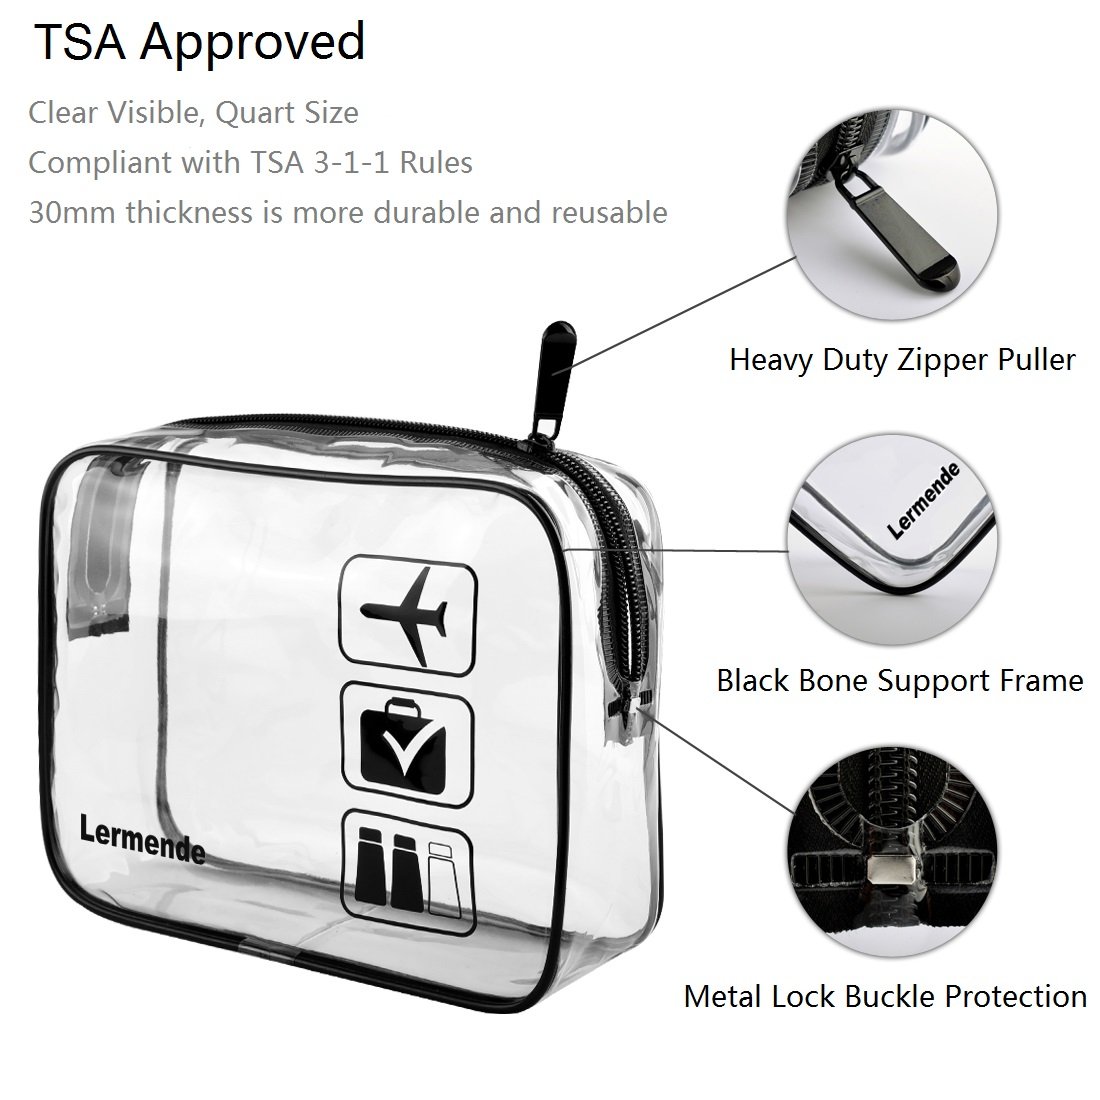 Lermende 3pcs TSA Approved Toiletry Bag with Zipper Travel Luggage Pouch Carry On Clear Airport Airline Compliant Bag Travel Cosmetic Makeup Bags for Men Women - Black